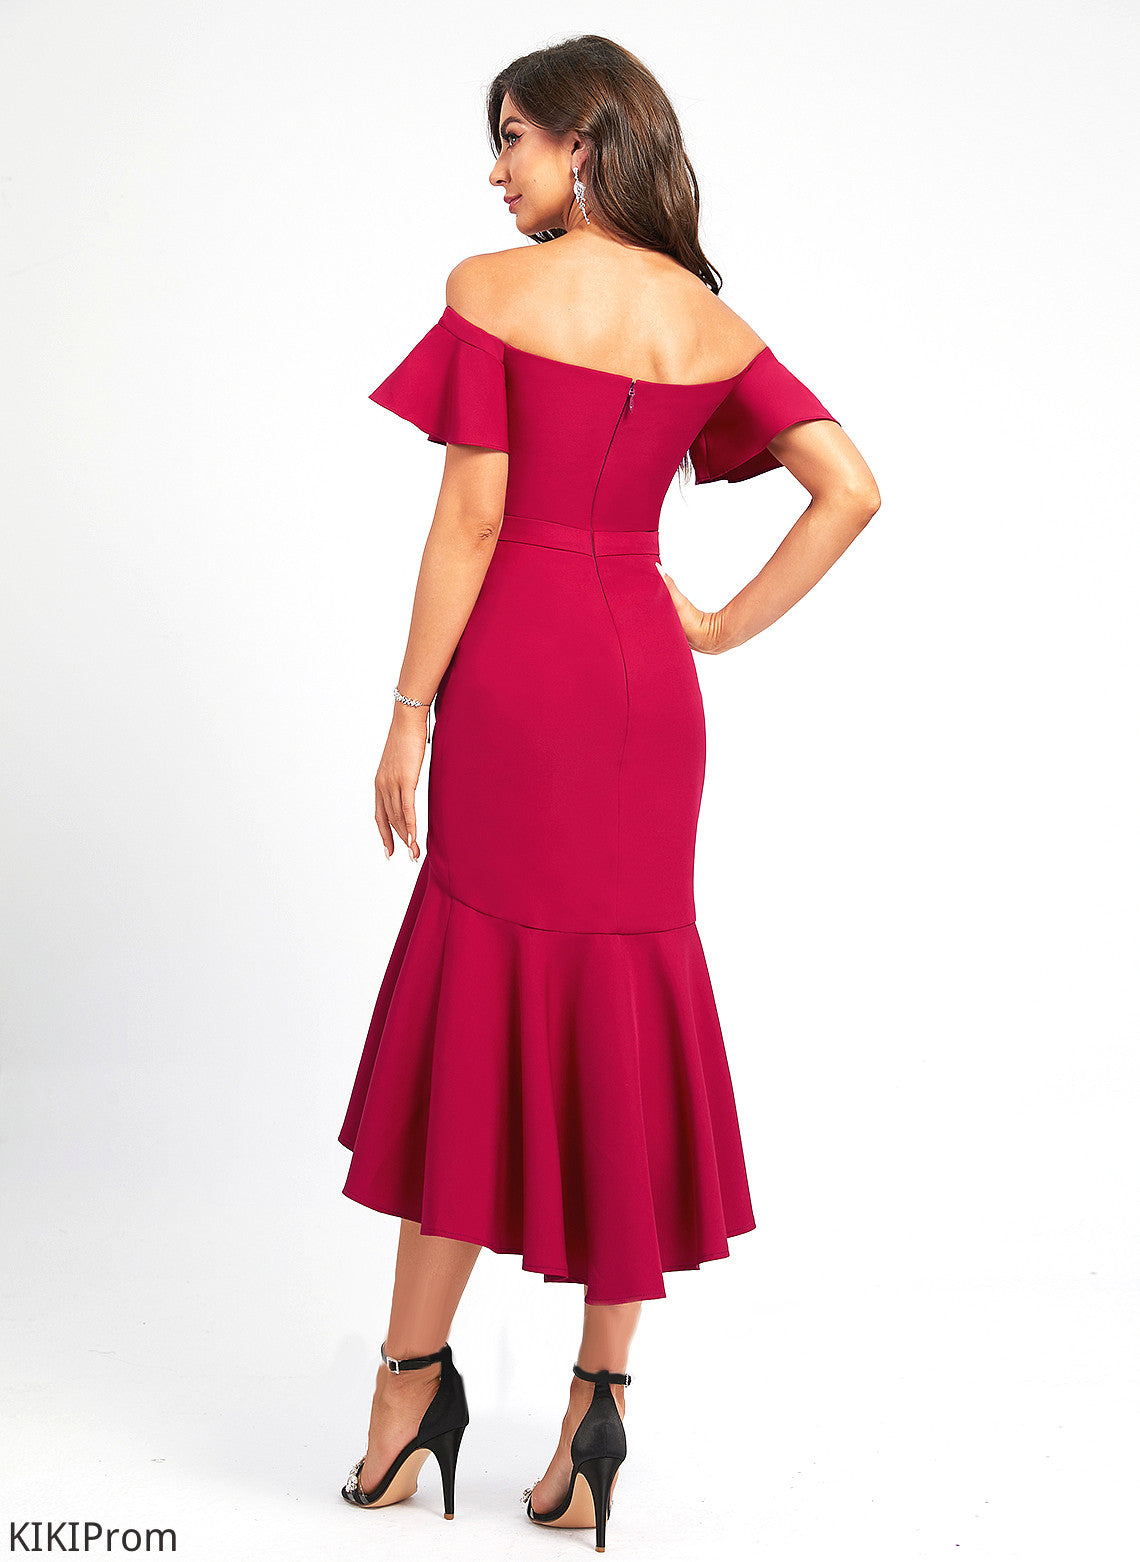 Crepe Cocktail Dresses Trumpet/Mermaid Ruffle Cocktail Off-the-Shoulder Asymmetrical Stretch With Raquel Dress